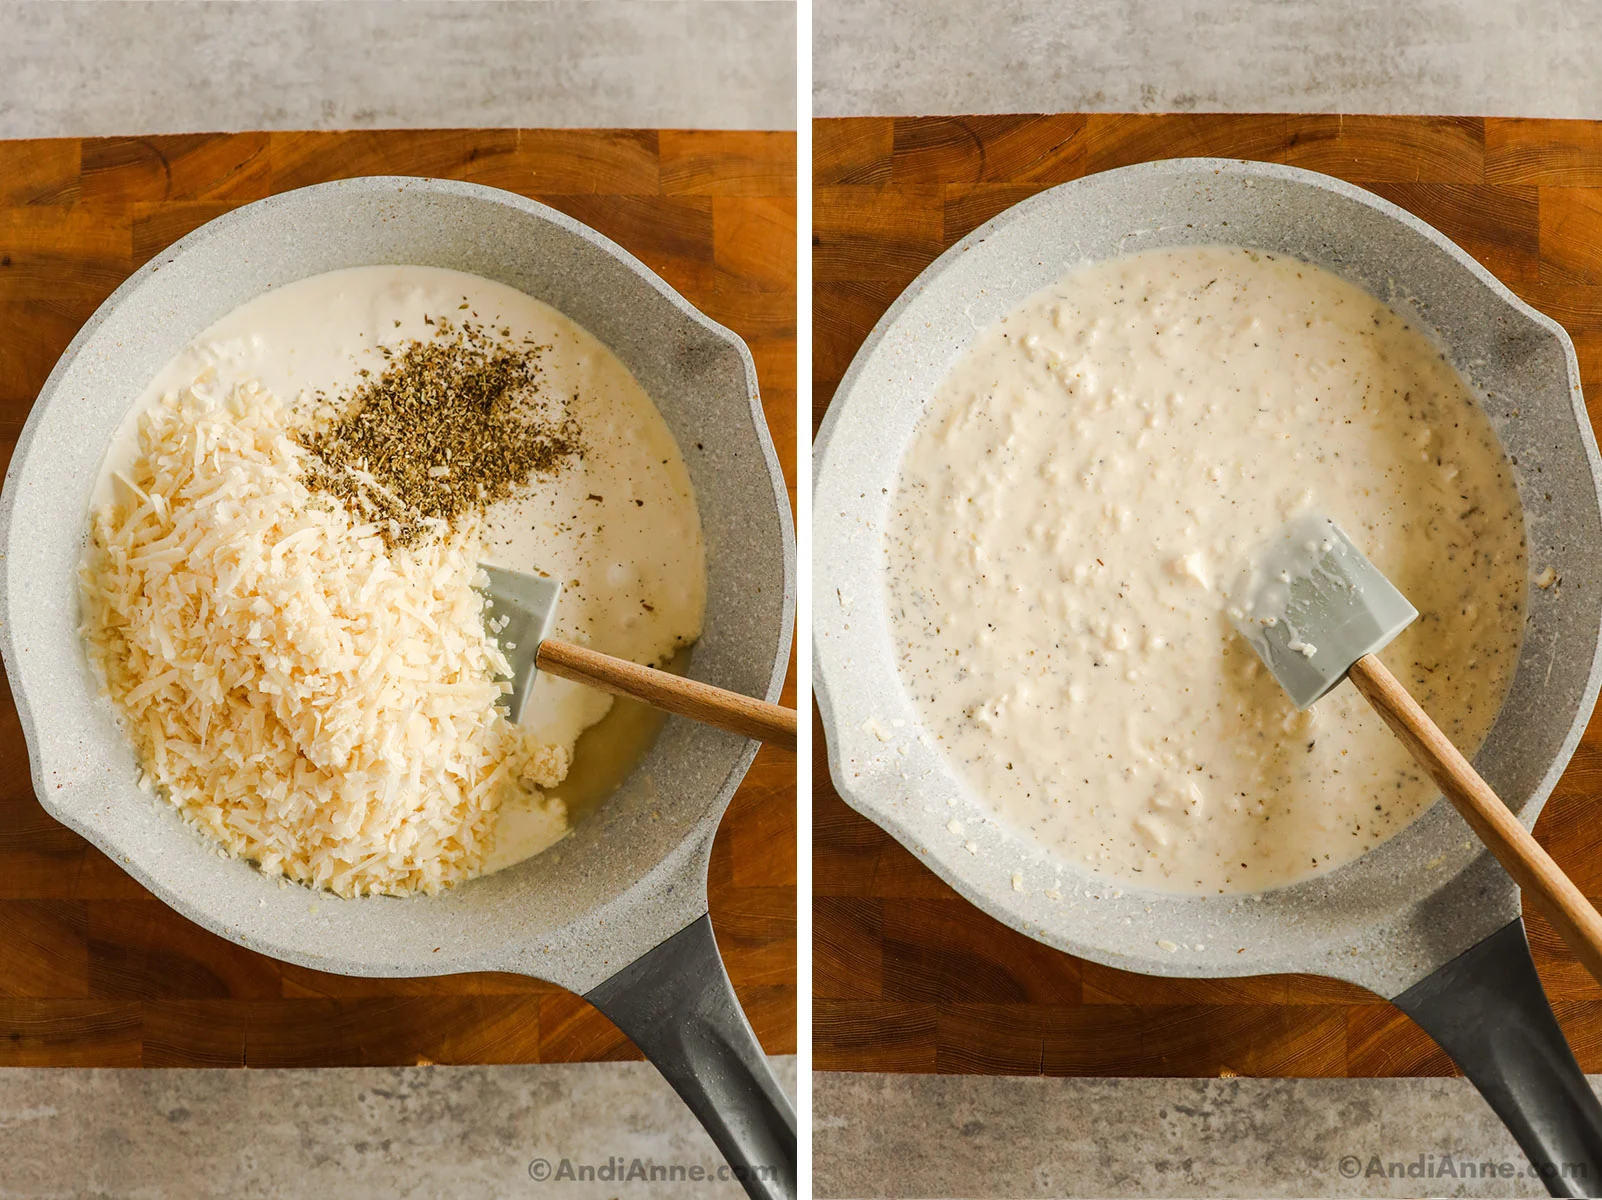 Parmesan, spices and cream dumped into a frying pan then mixed with spatula to create creamy sauce.